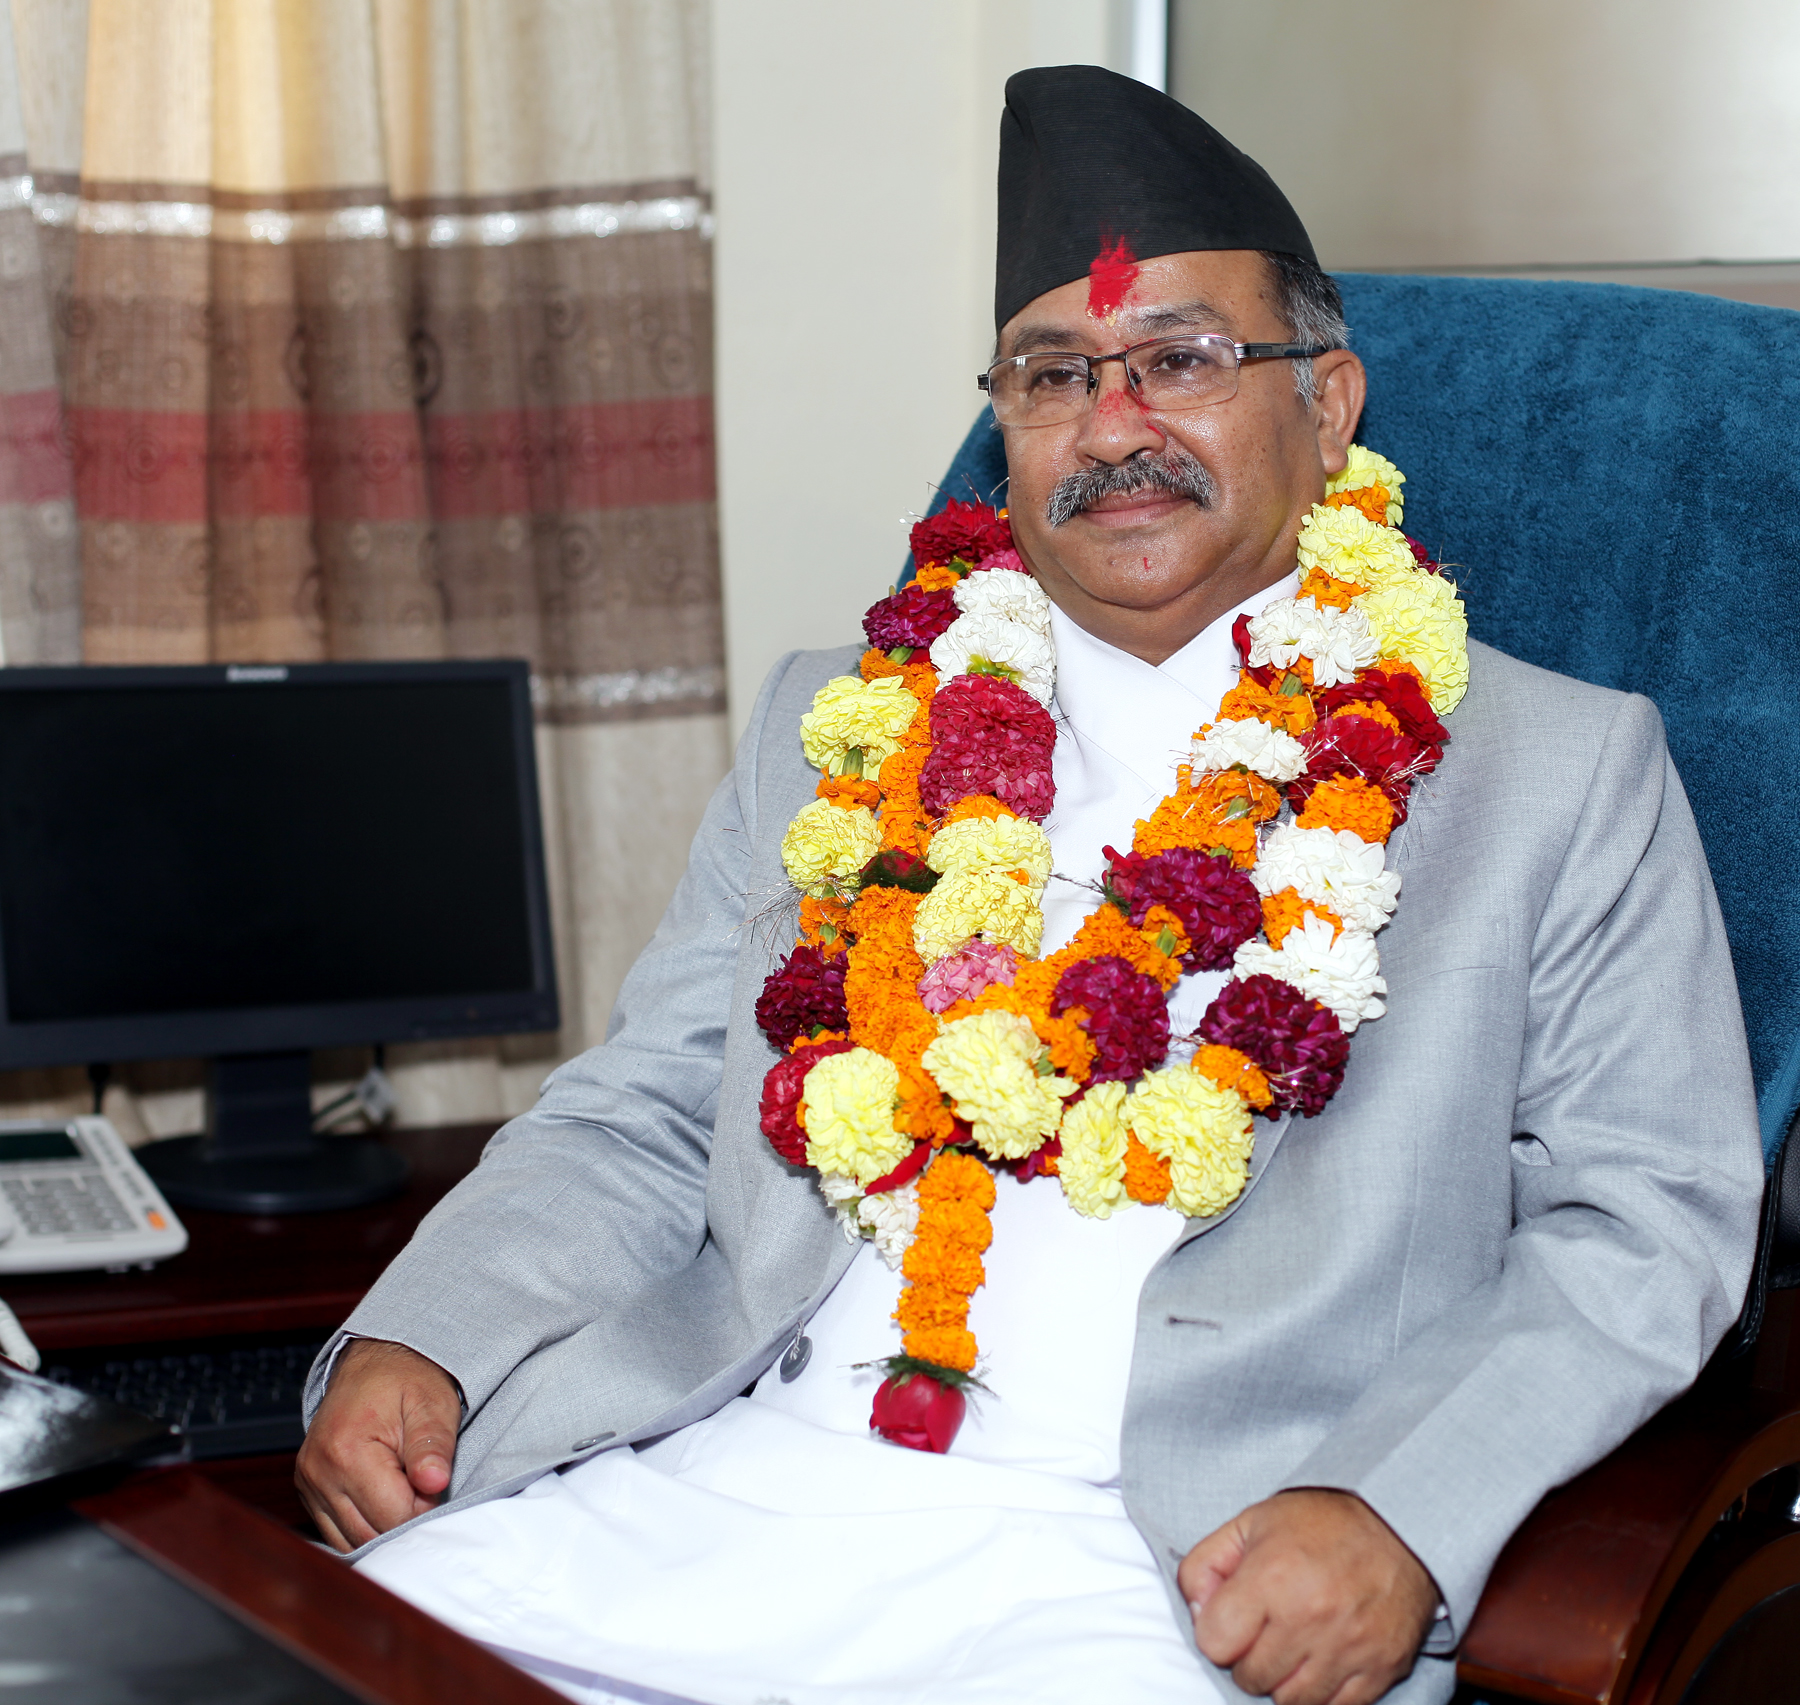 Newly-appointed Chief Justice Kalyan Shrestha poses for a photo during his first day at Supreme Court on Wednesday in Kathmandu. Photo: Kumar Shrestha/RSS